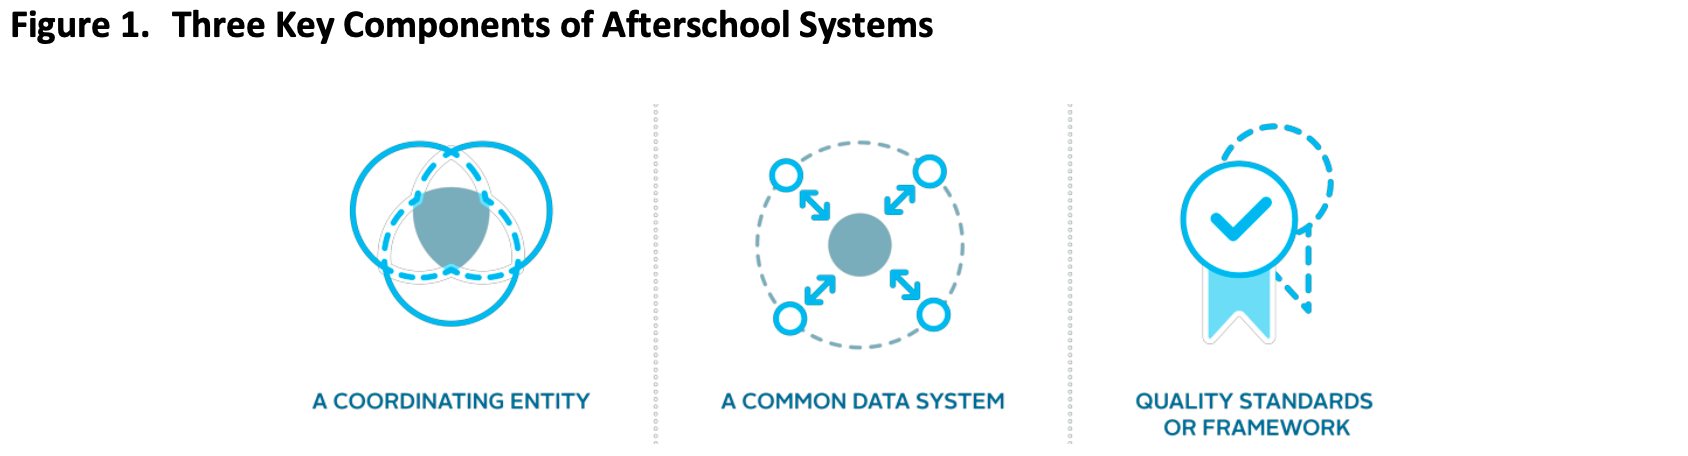 Diagram showing the three key components of afterschool systems: a coordinating entity, a common data system, and quality standards or framework.